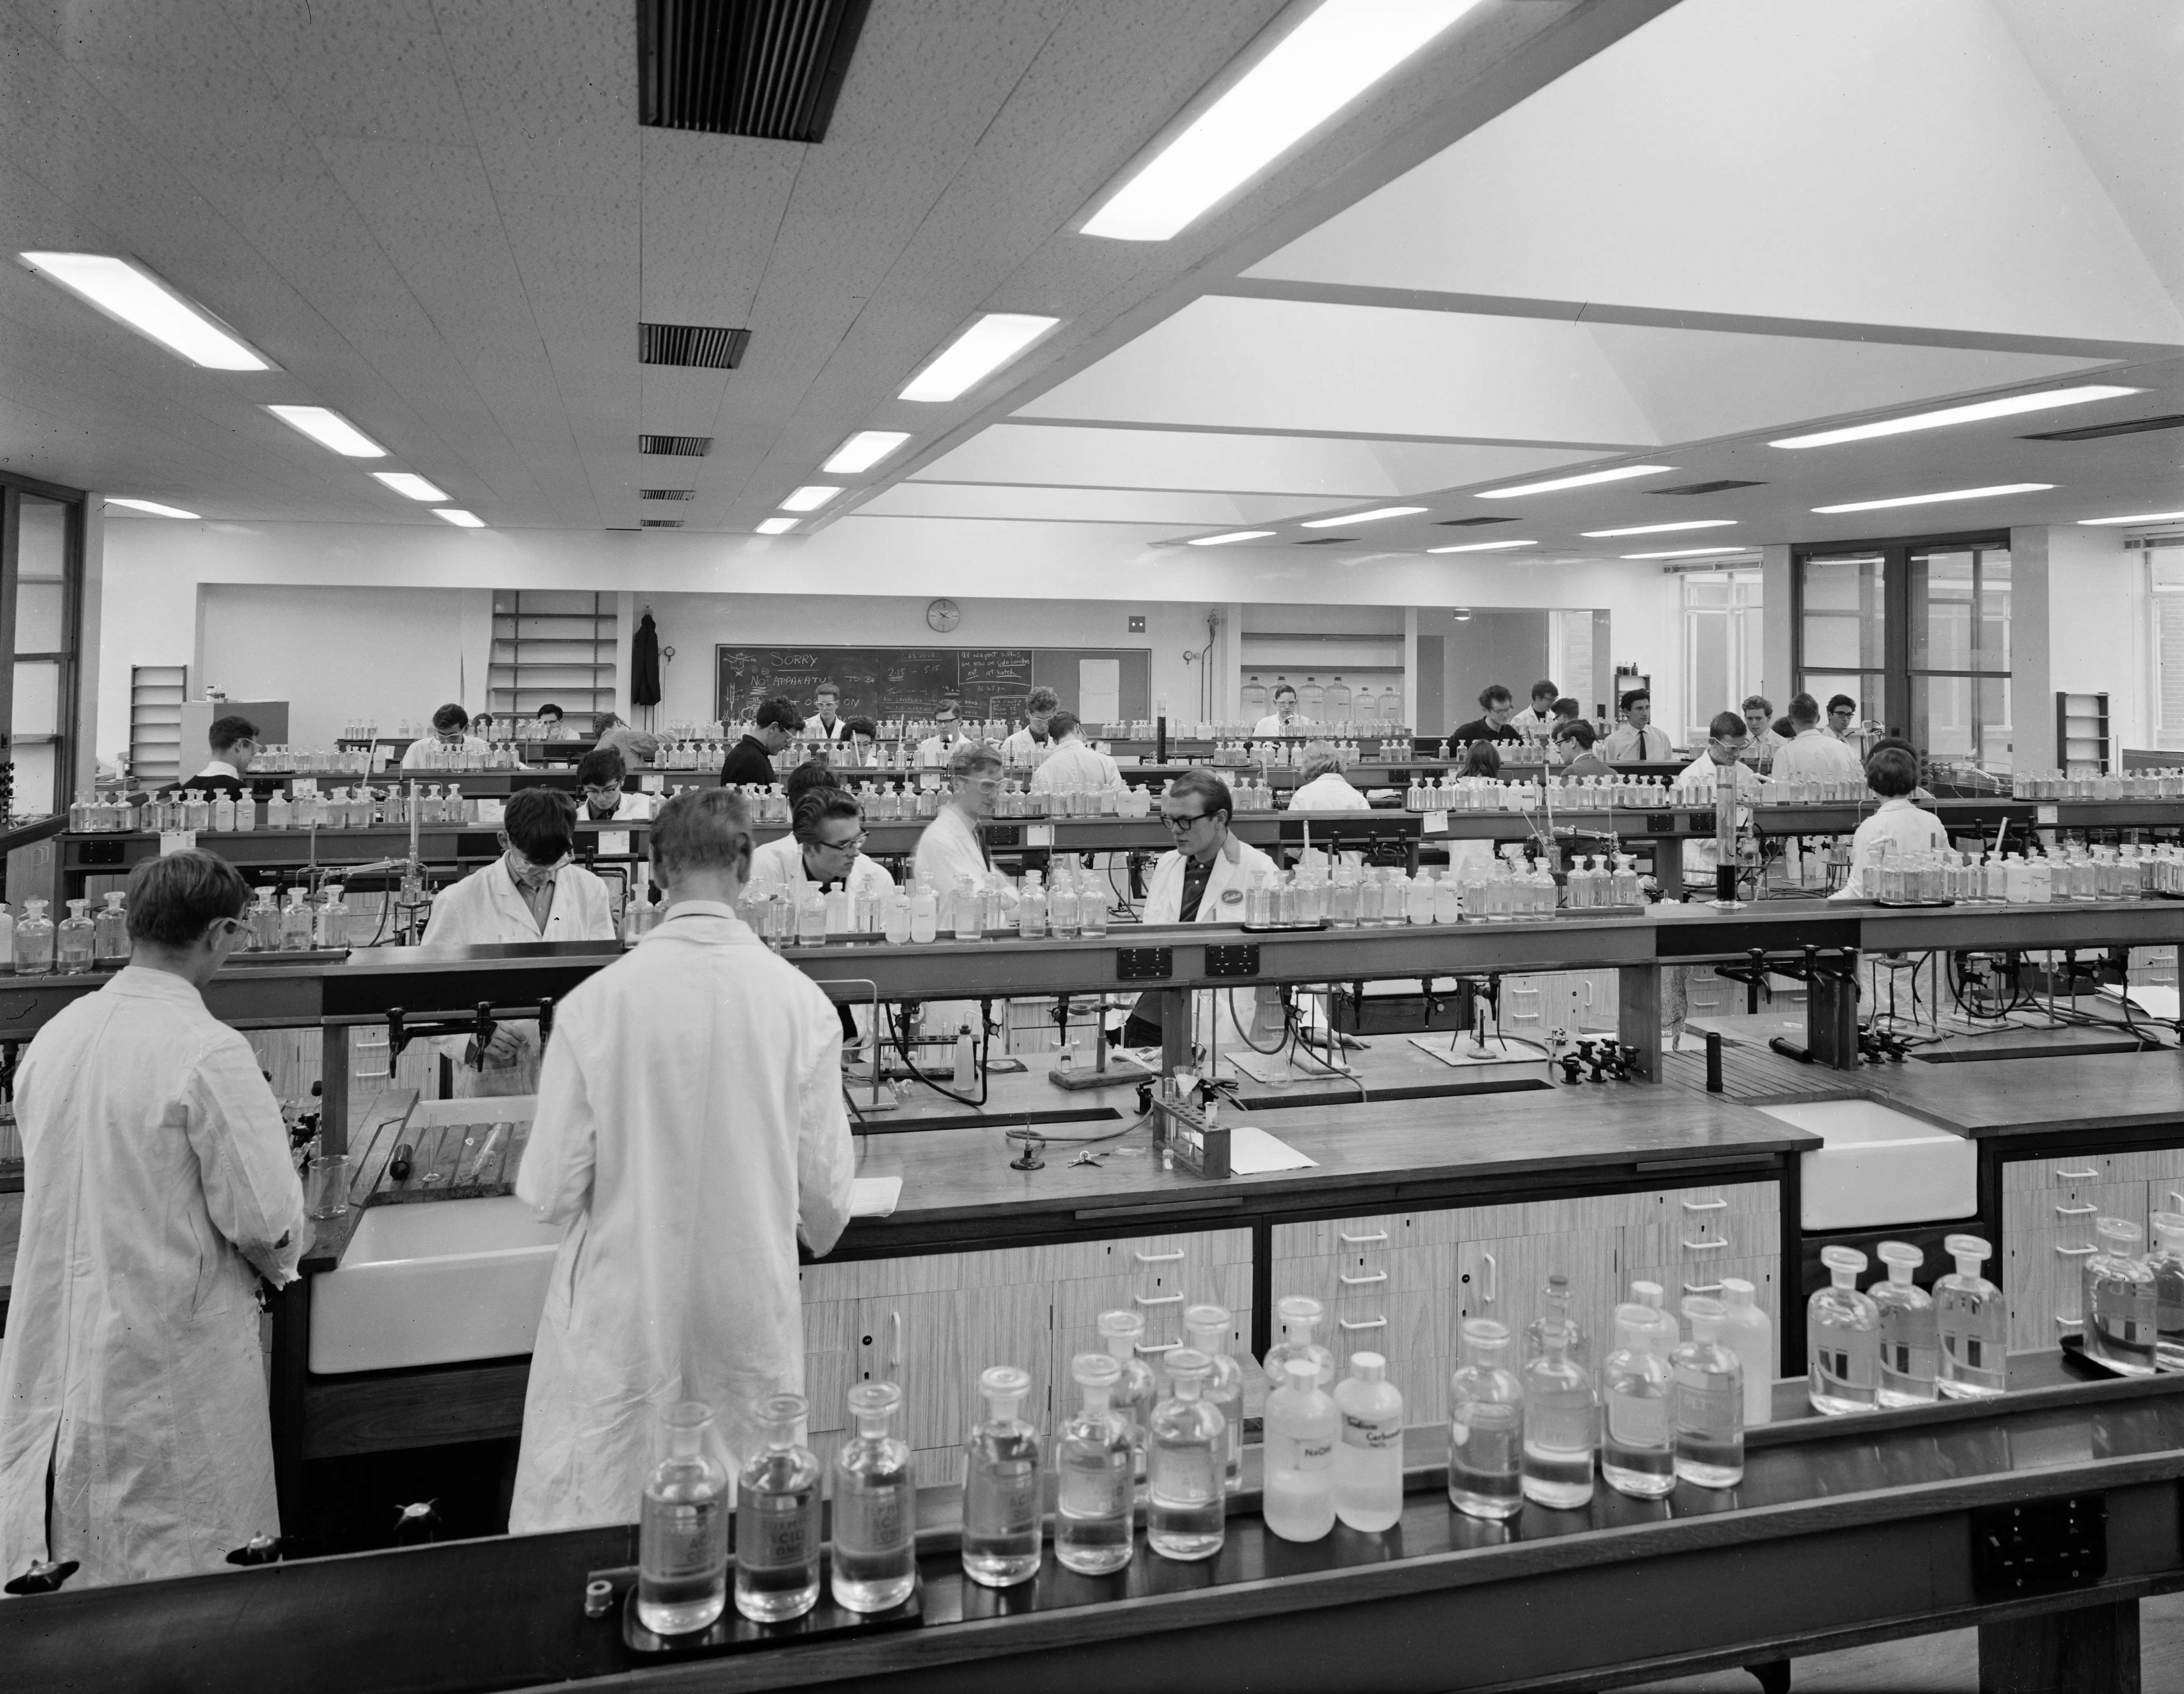 Men in white coats working in a lab